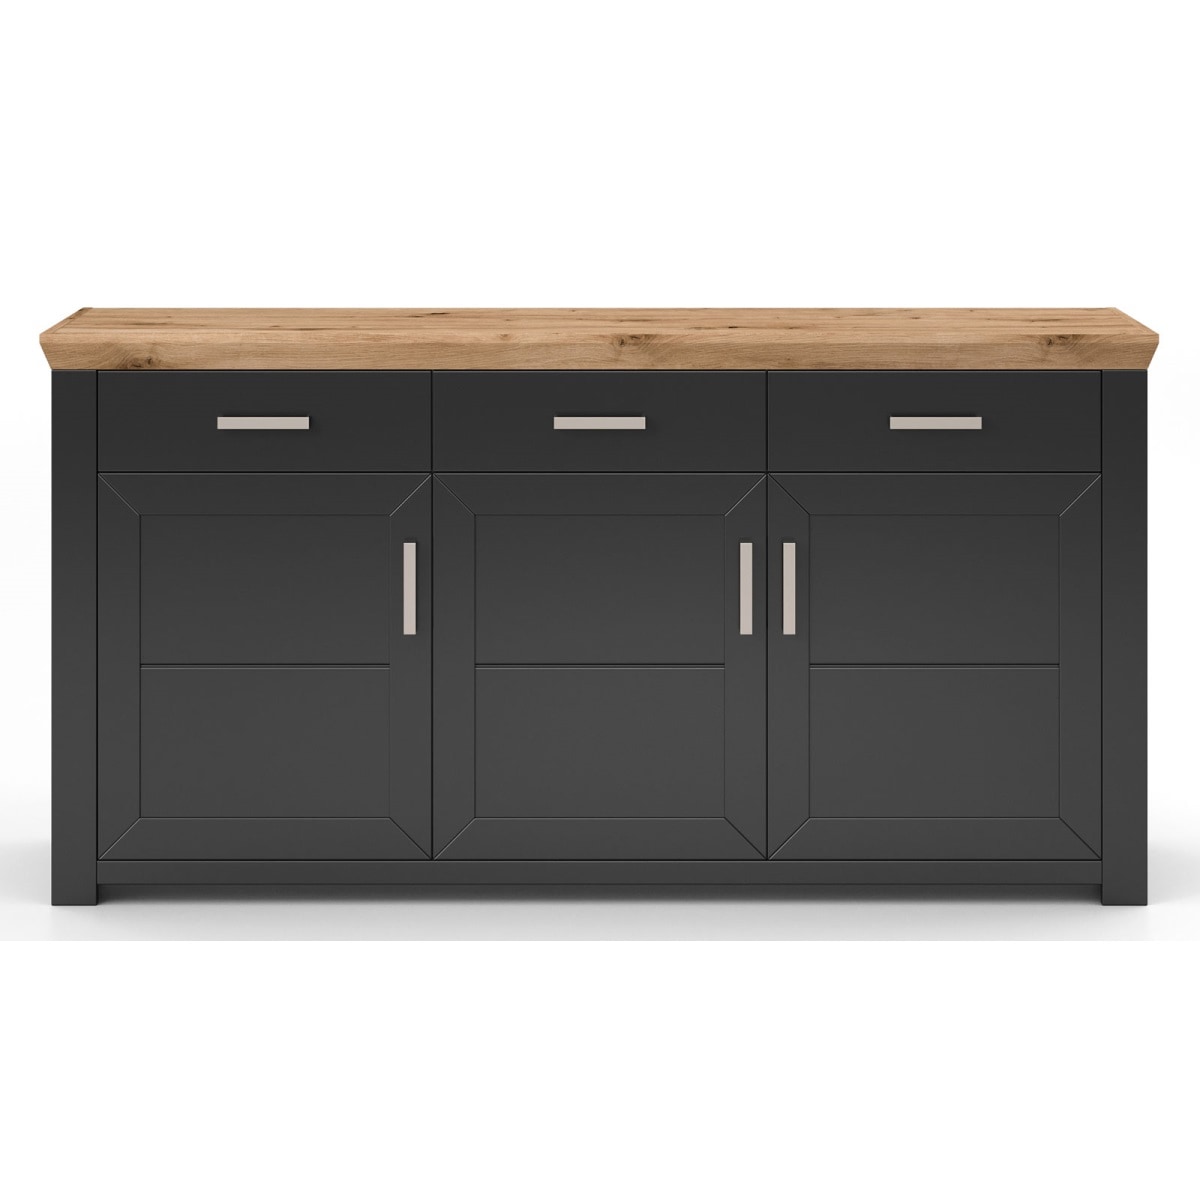 Sideboard one Artisan anthrazit YORK 52 by set /Eiche Musterring